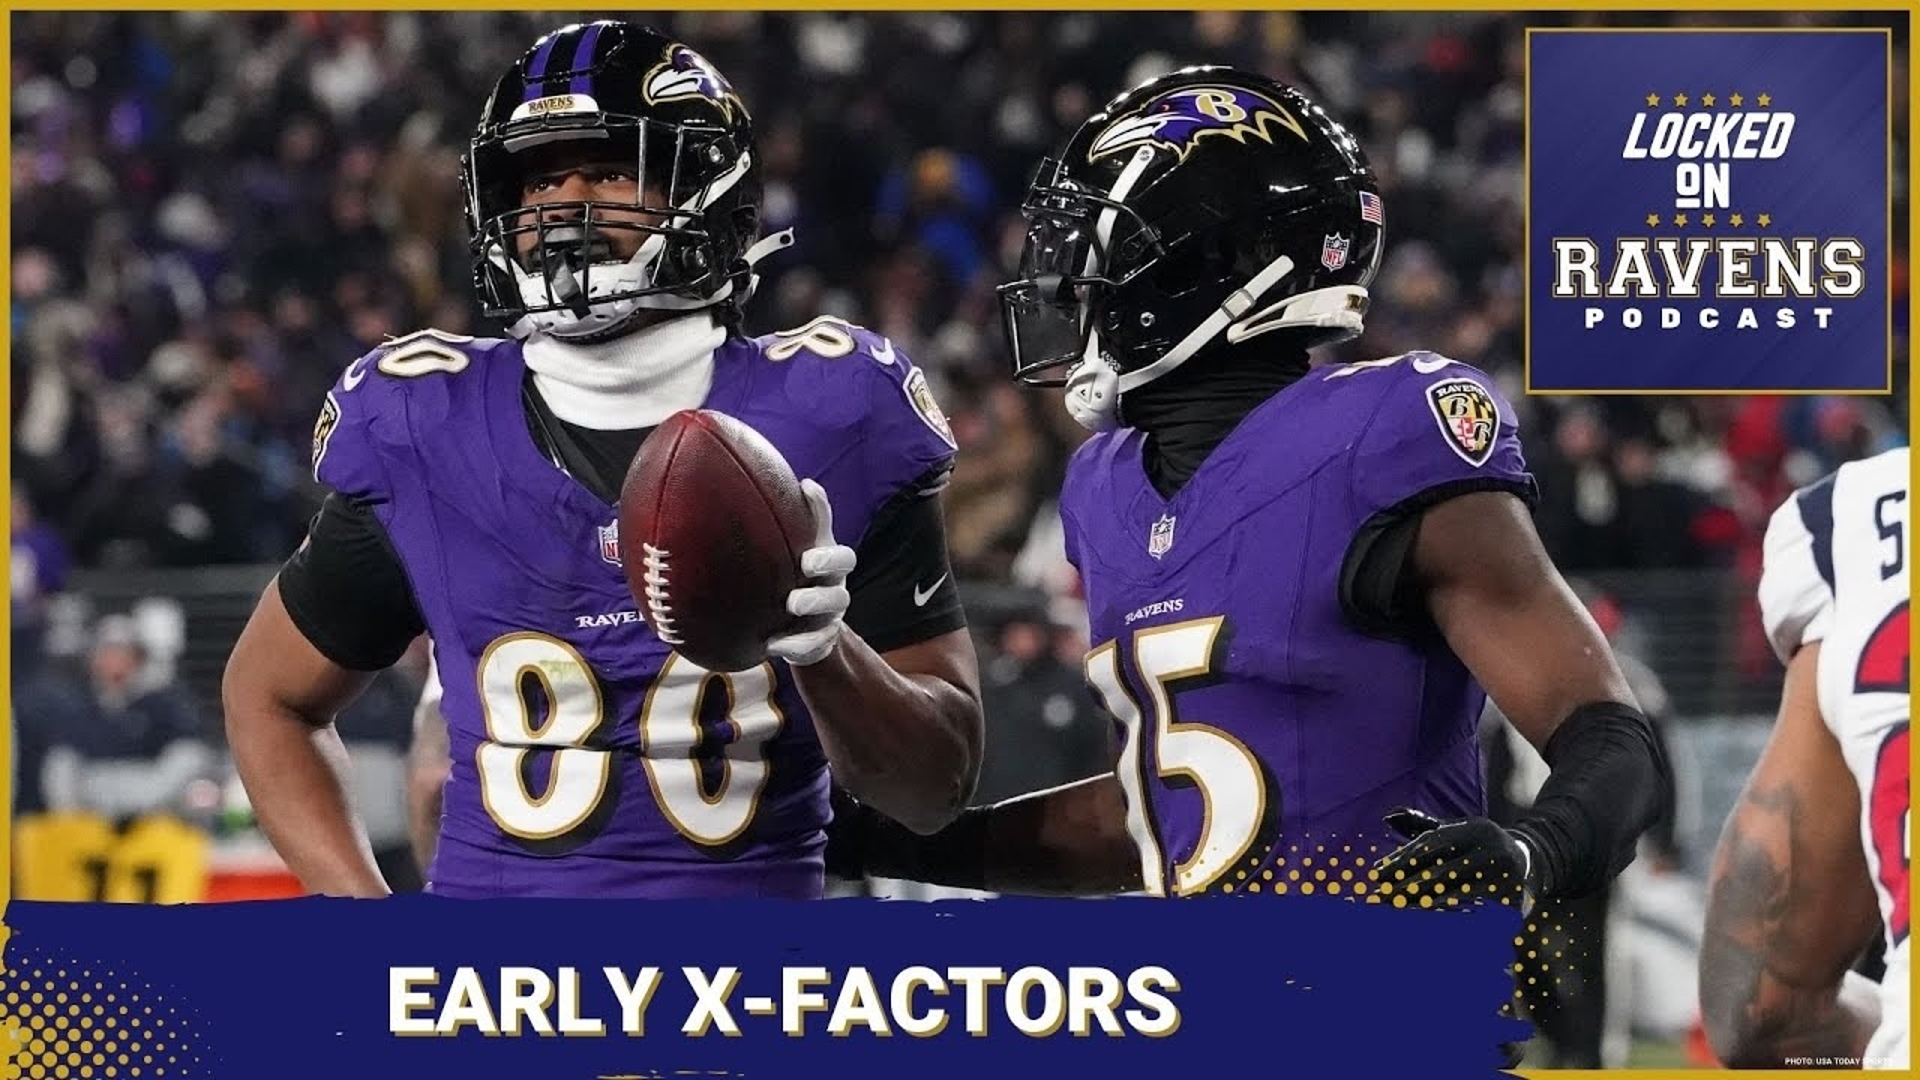 We look at early Baltimore Ravens X-factors, breakout players.